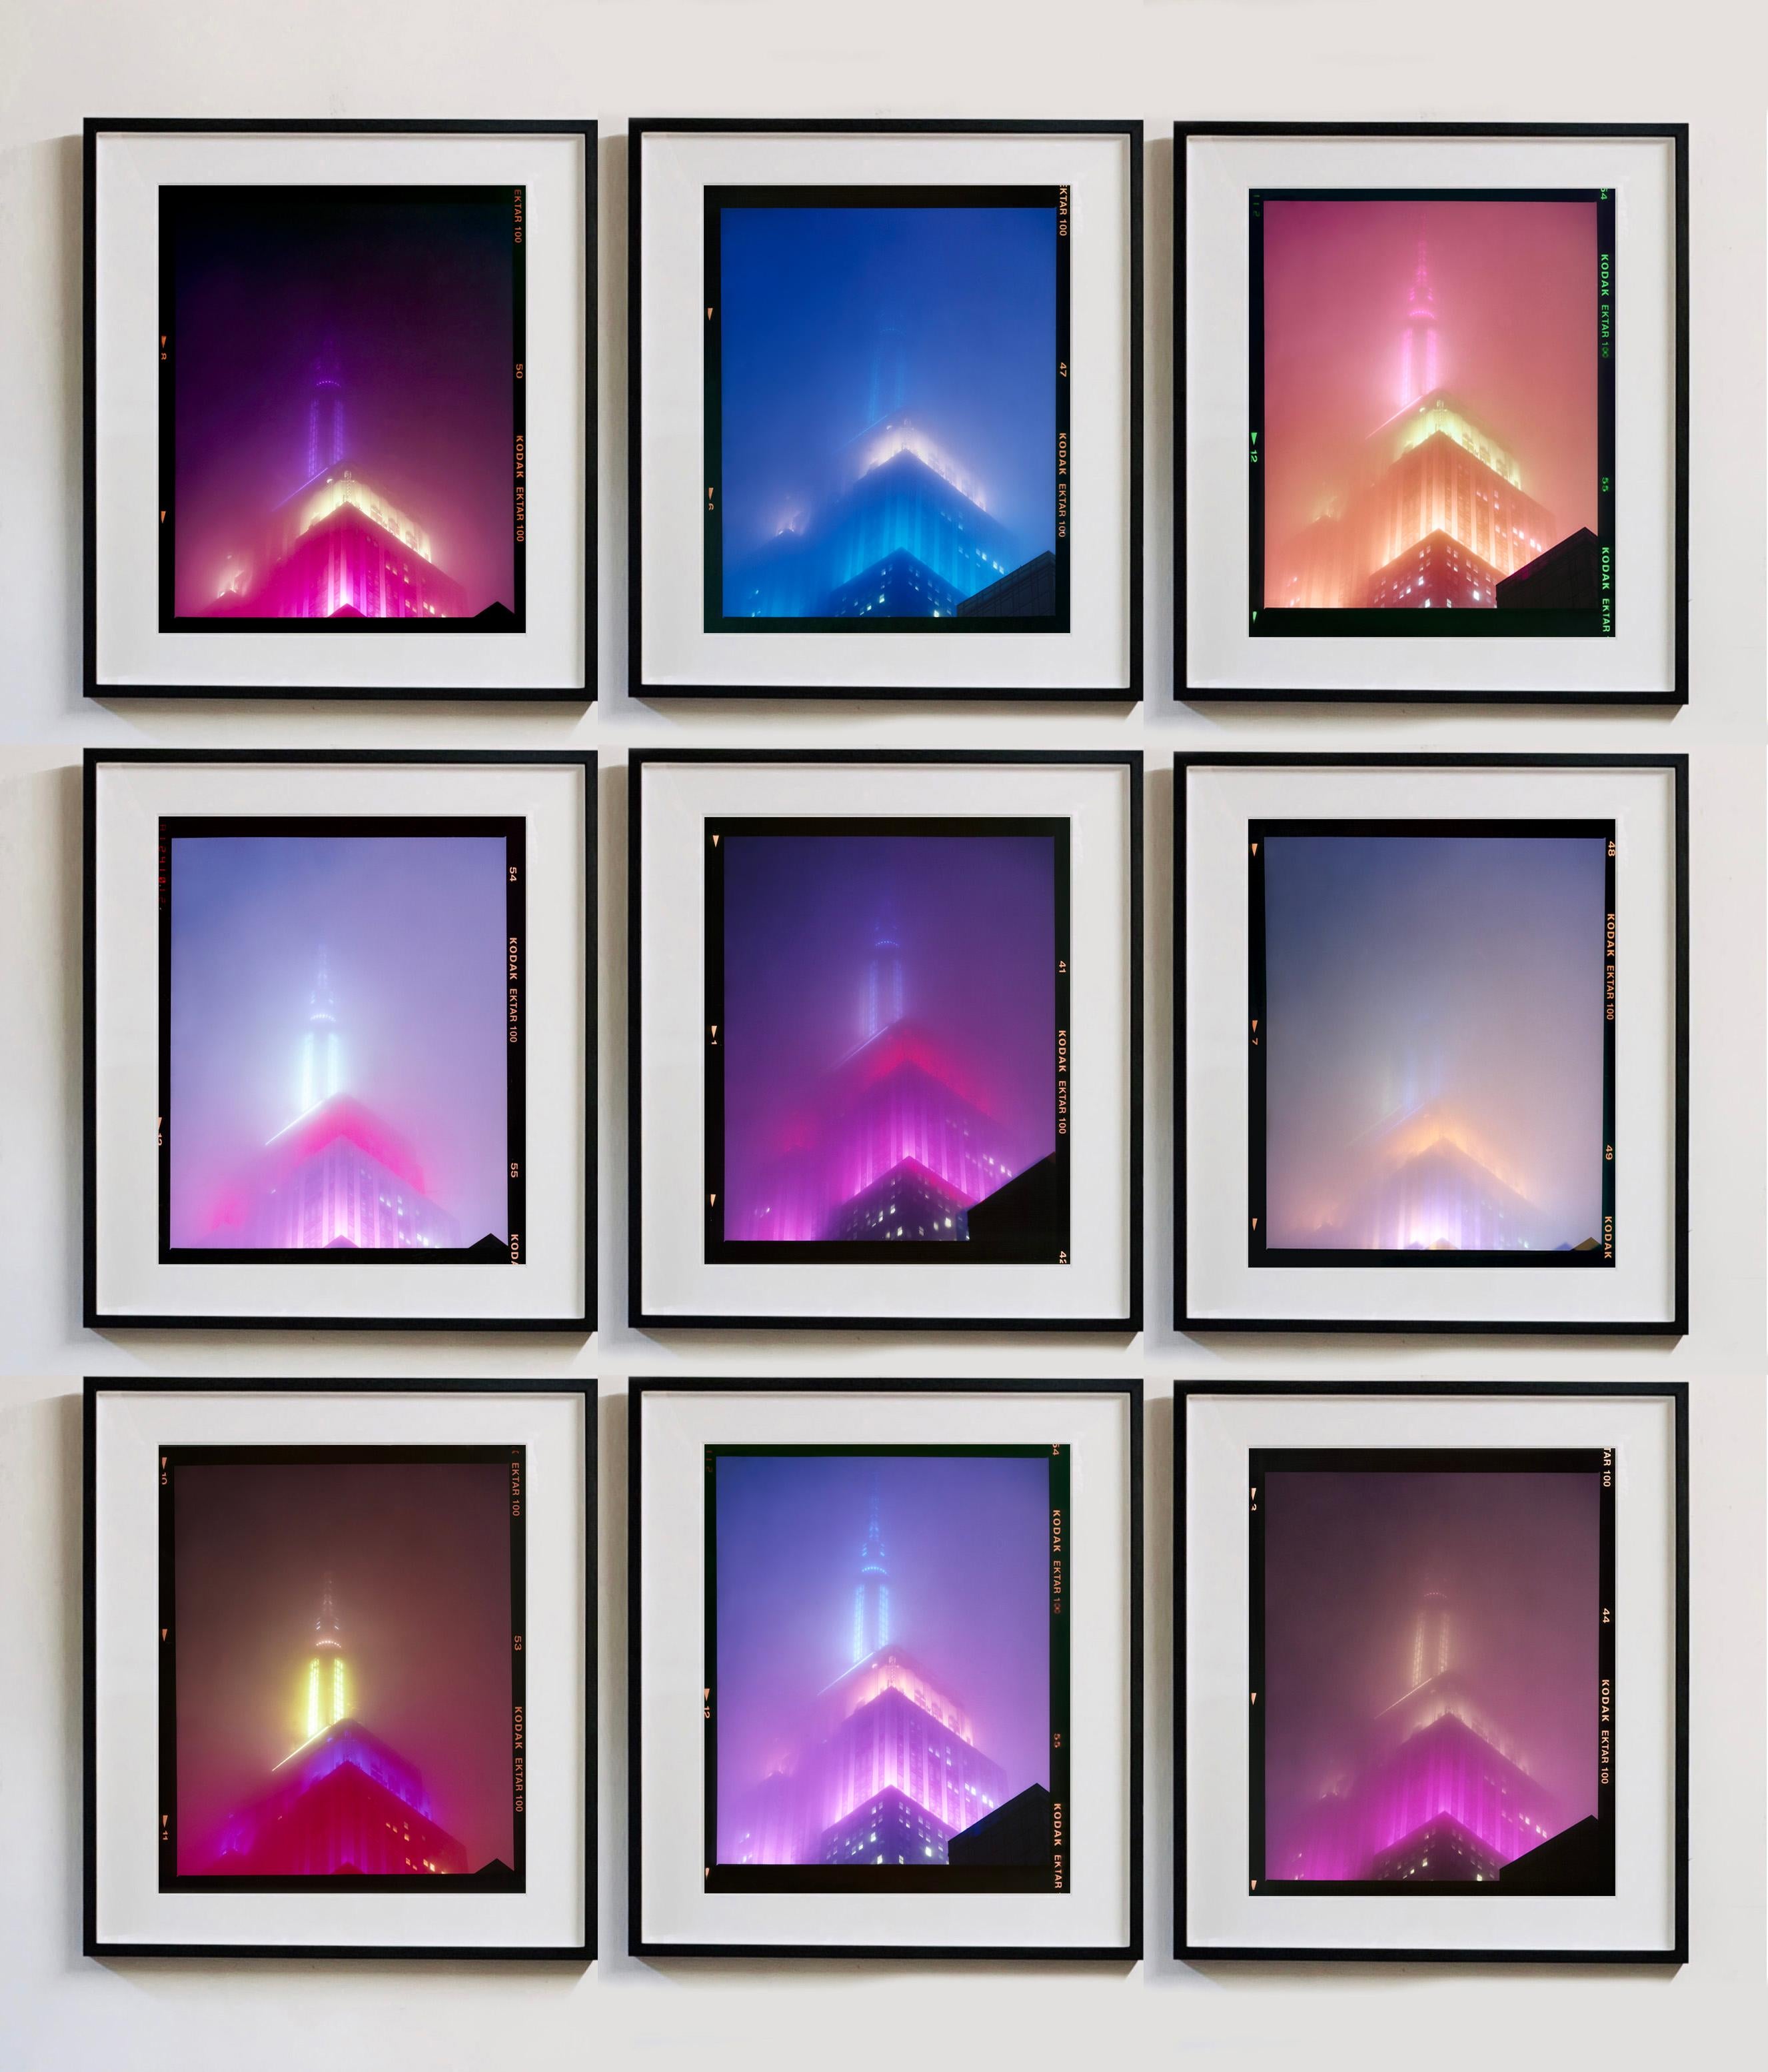 'NOMAD IV (Film Rebate)', New York. Richard Heeps has photographed the iconic Empire State building in the mist. The NOMAD sequence of photographs capture the art deco architecture illuminated by changing colours, and is part of Richard's street